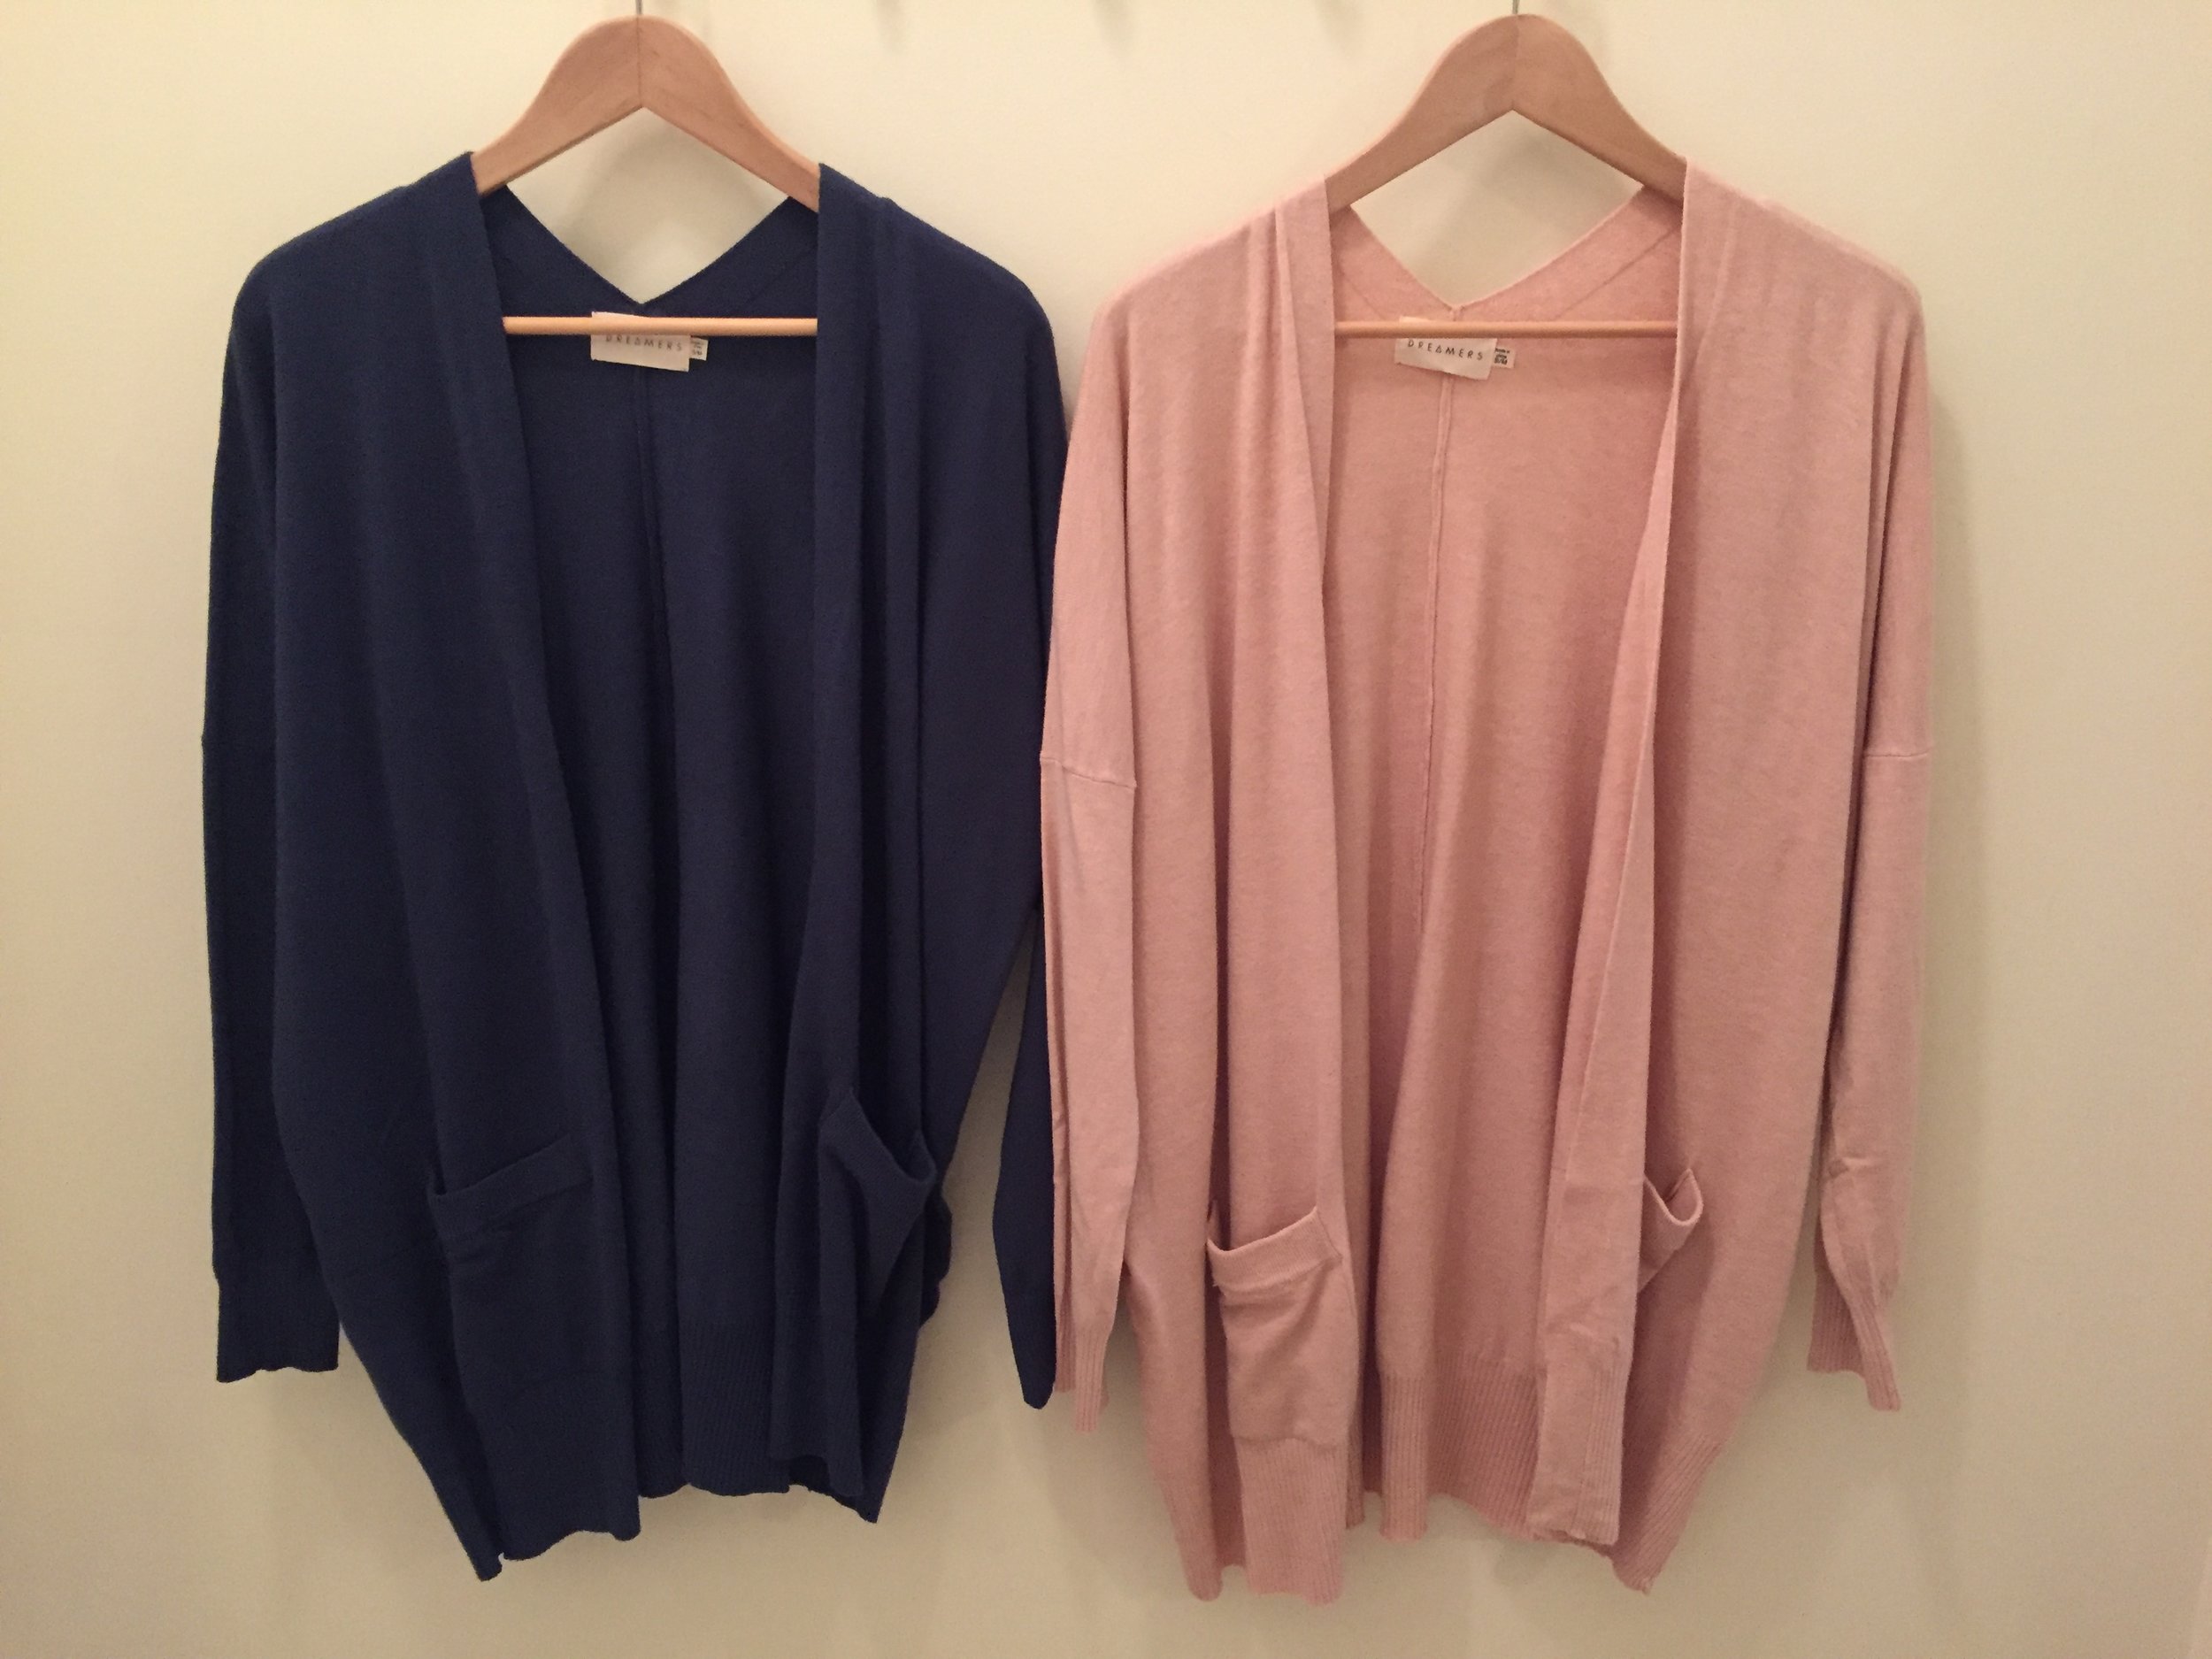 Dreamers Cardigan $45 (Blush and Blue)